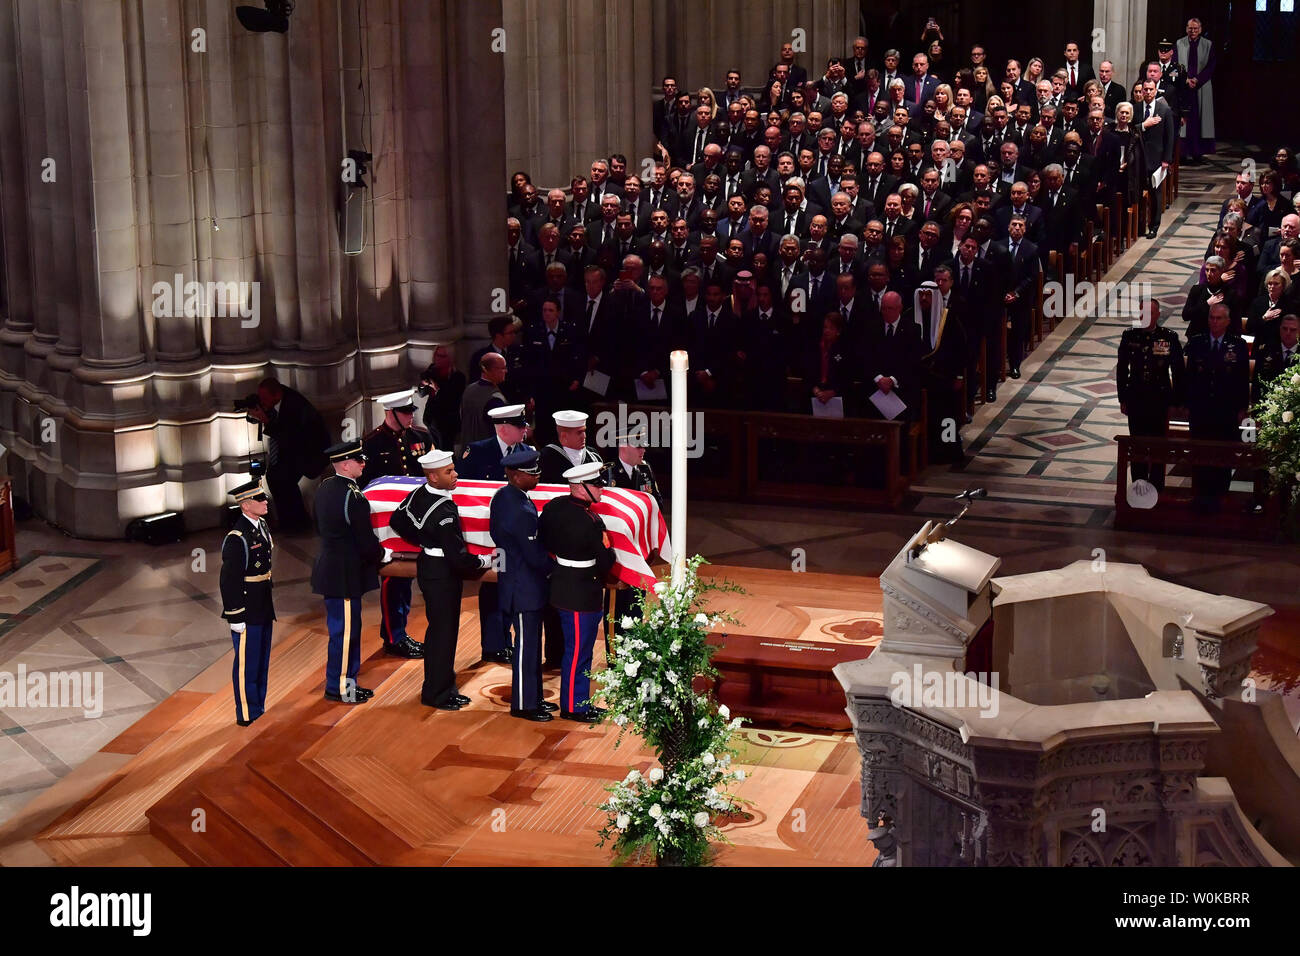 The casket arrives for the funeral of former President George H.W. Bush at the National Cathedral in Washington D.C. on December 5, 2018.   Photo by Kevin Dietsch/UPI Stock Photo